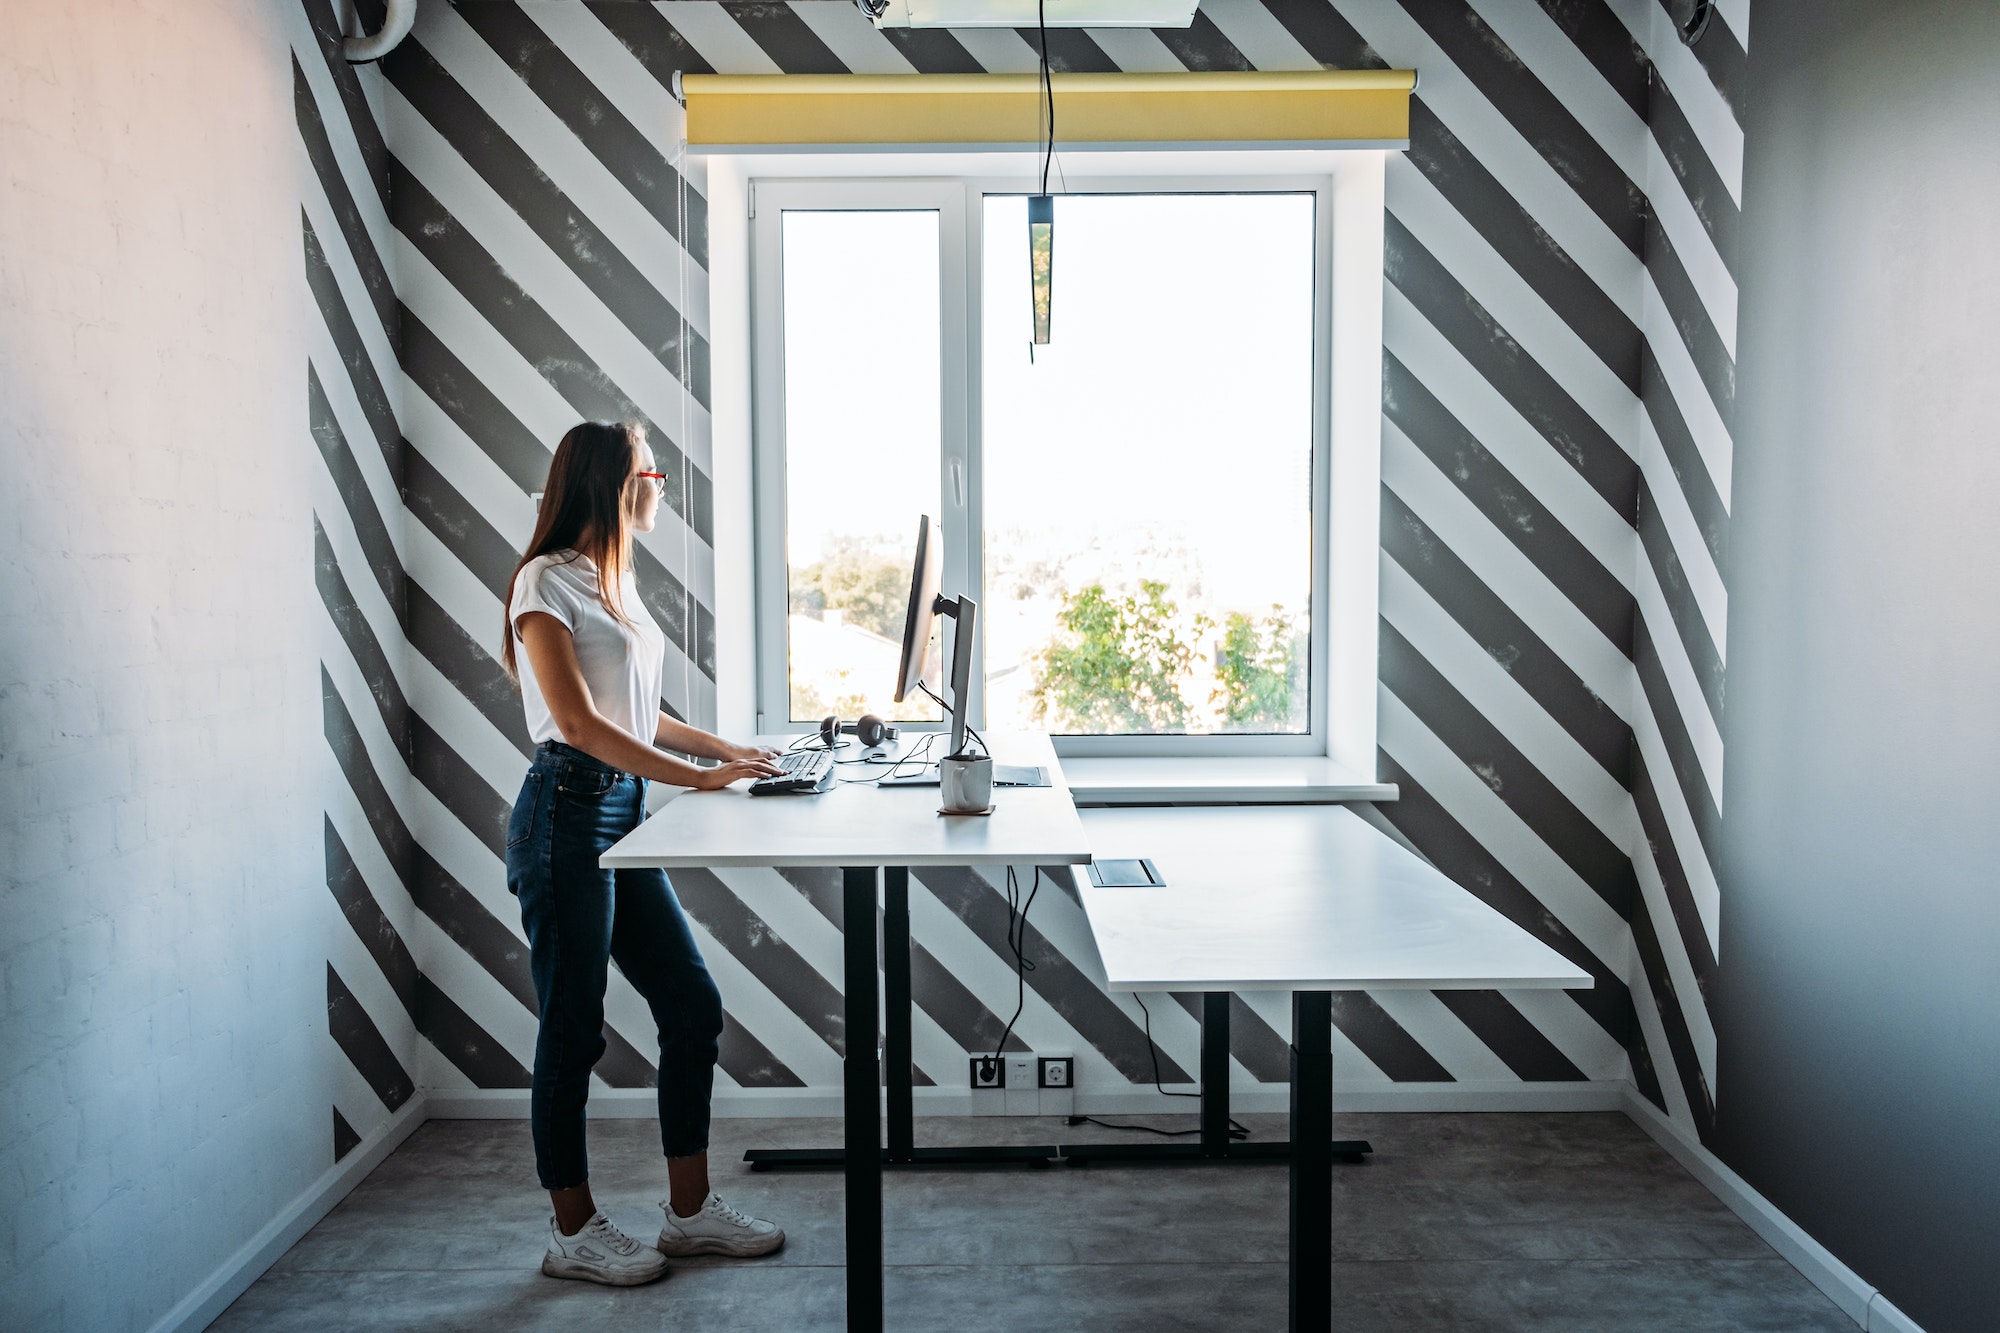 Standing desk for work from home or in office. Young woman programmer working